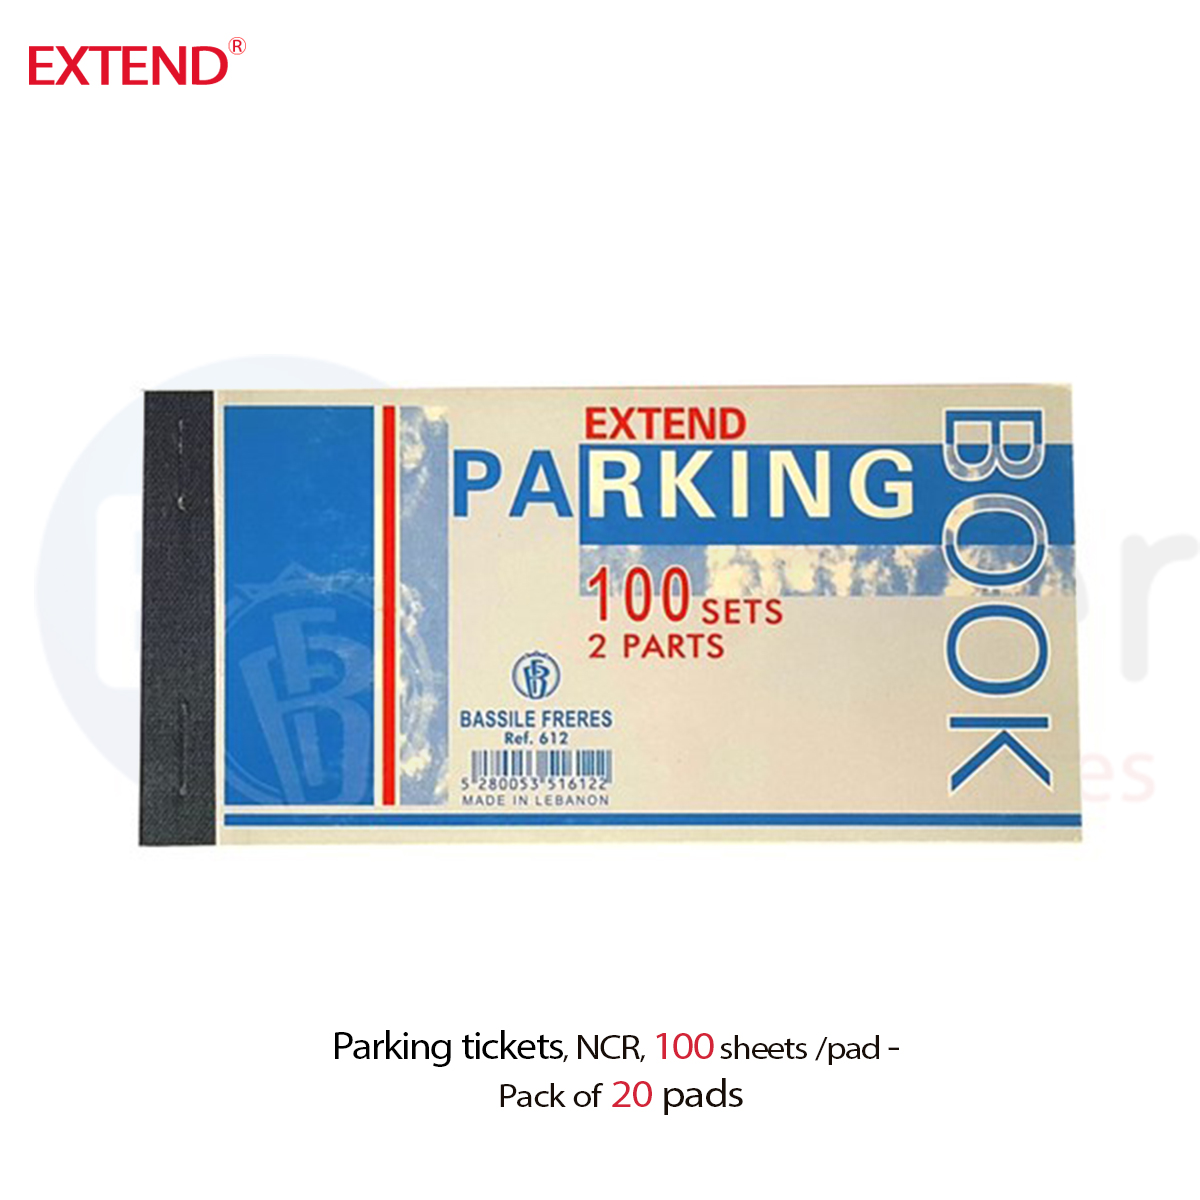 Parking tickets (100 sheets/pad) Numbered